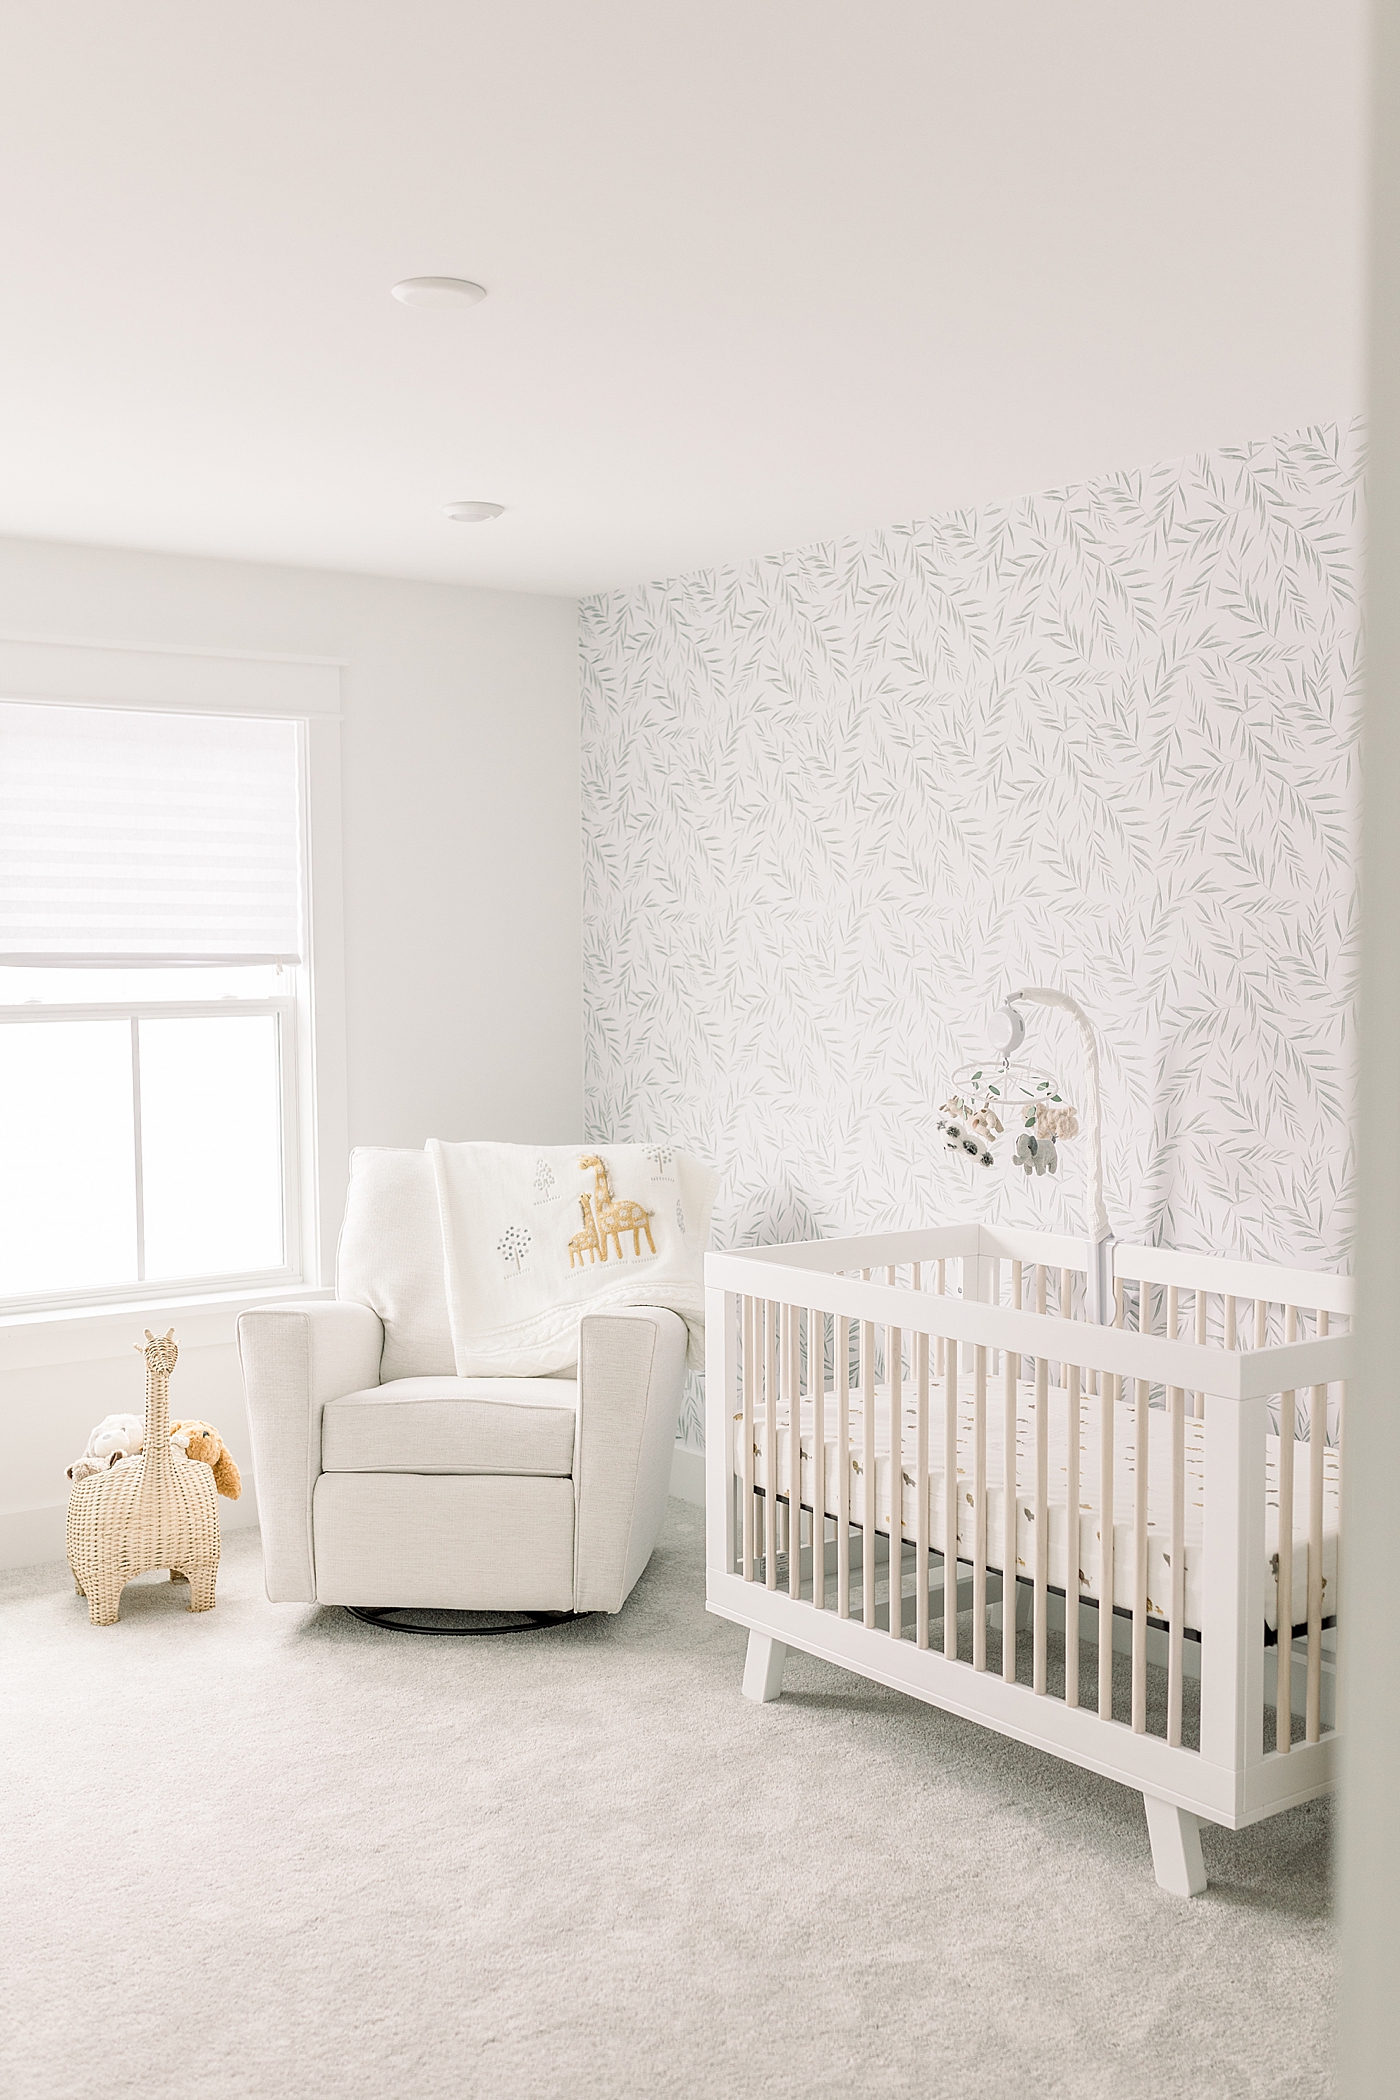 Baby boys nursery with crib glider and pretty wallpaper | Photo by Caitlyn Motycka Photography